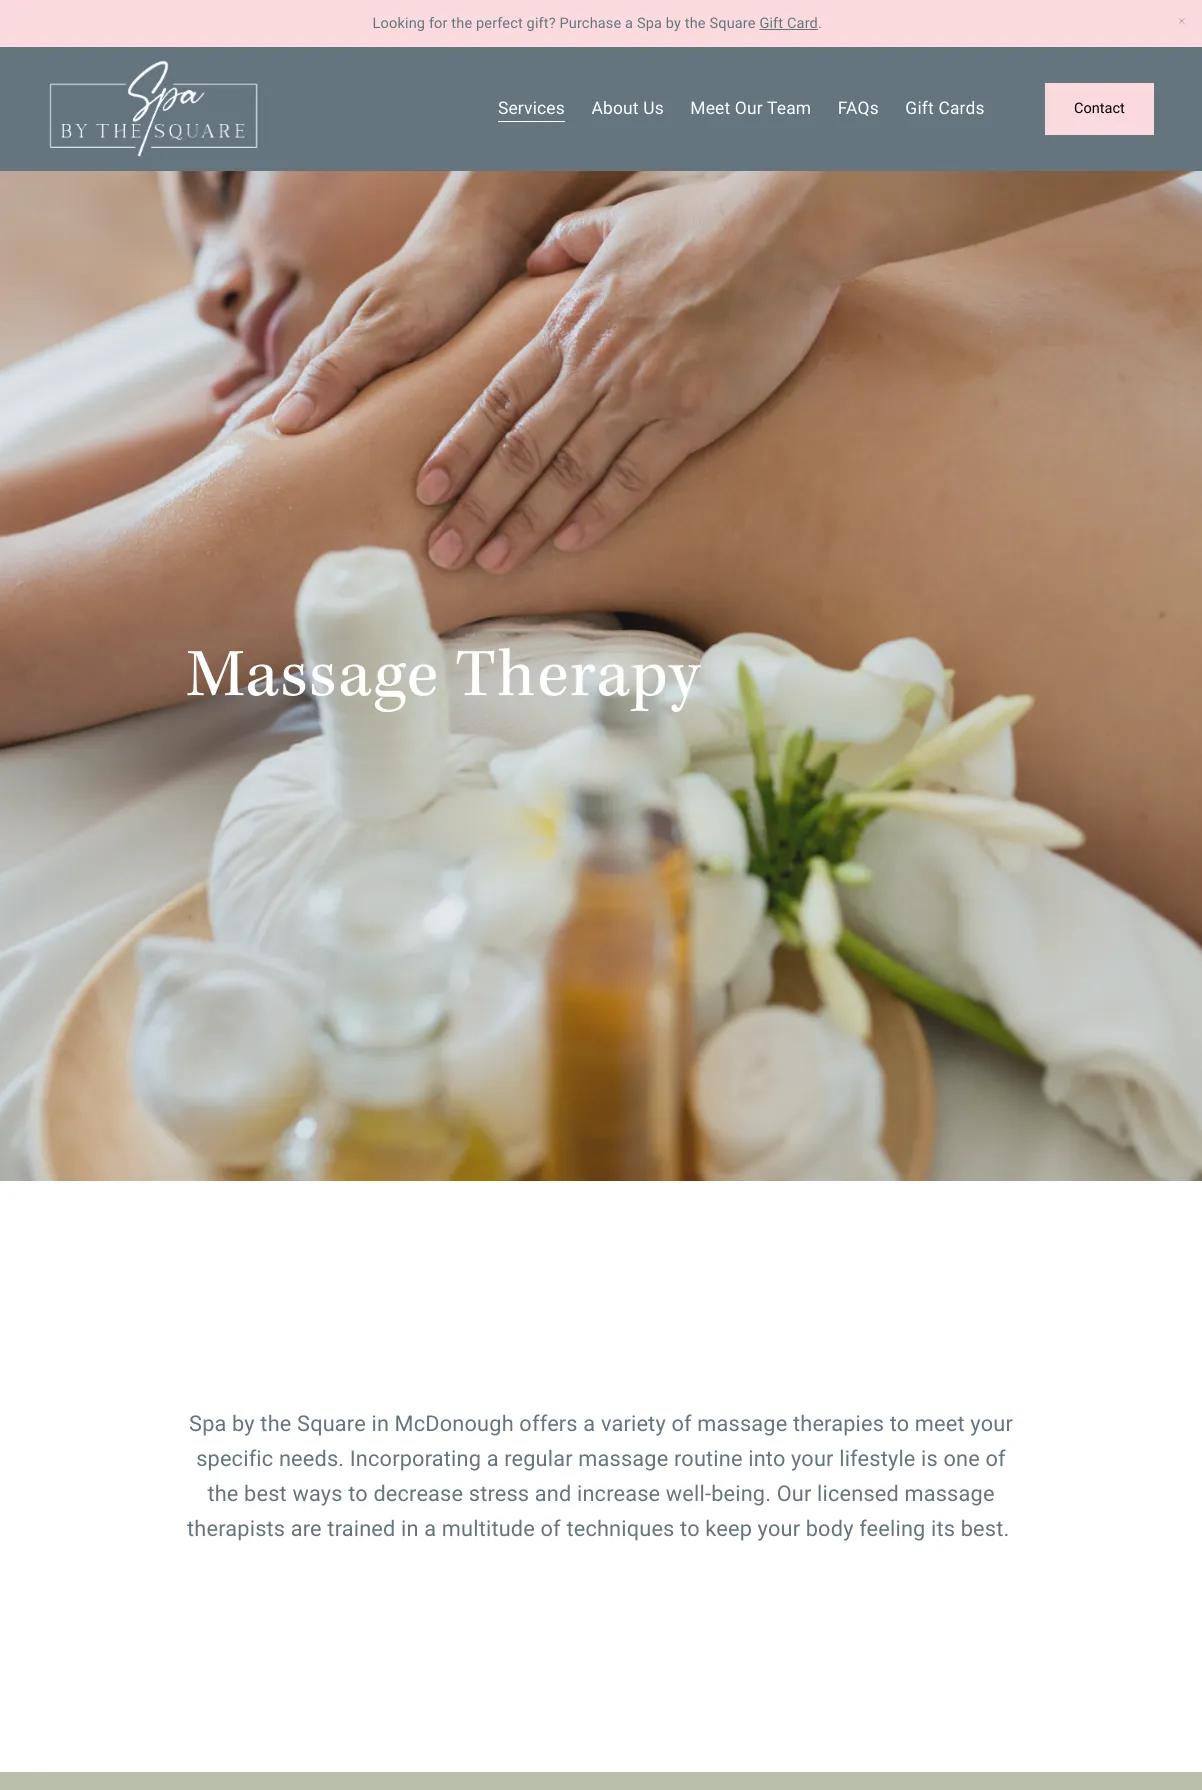 Screenshot 2 of Spa by the Square (Example Squarespace Esthetician Website)